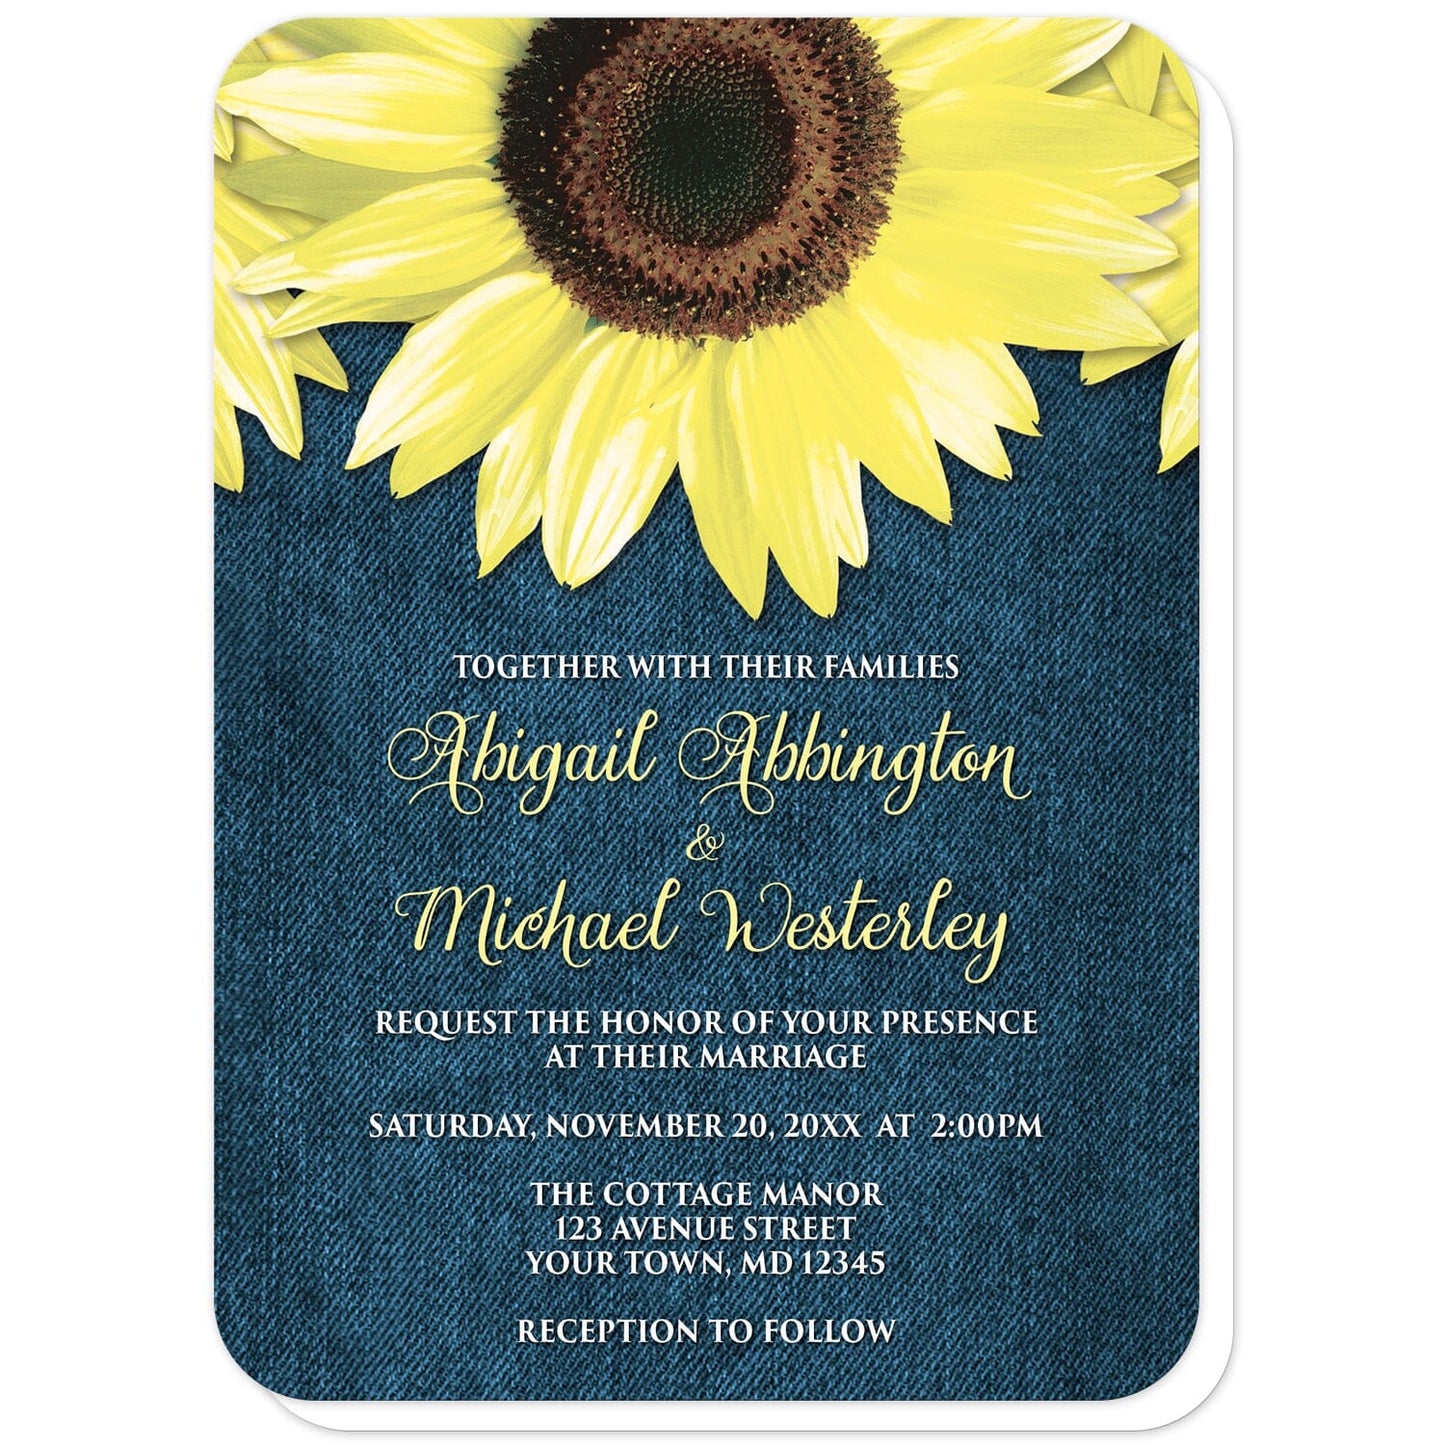 Rustic Sunflower and Denim Wedding Invitations (with rounded corners) at Artistically Invited. Southern-inspired rustic sunflower and denim wedding invitations designed with large yellow sunflowers along the top over a country blue denim design. Your personalized marriage ceremony details are custom printed in yellow and white over the blue denim background below the pretty sunflowers. 